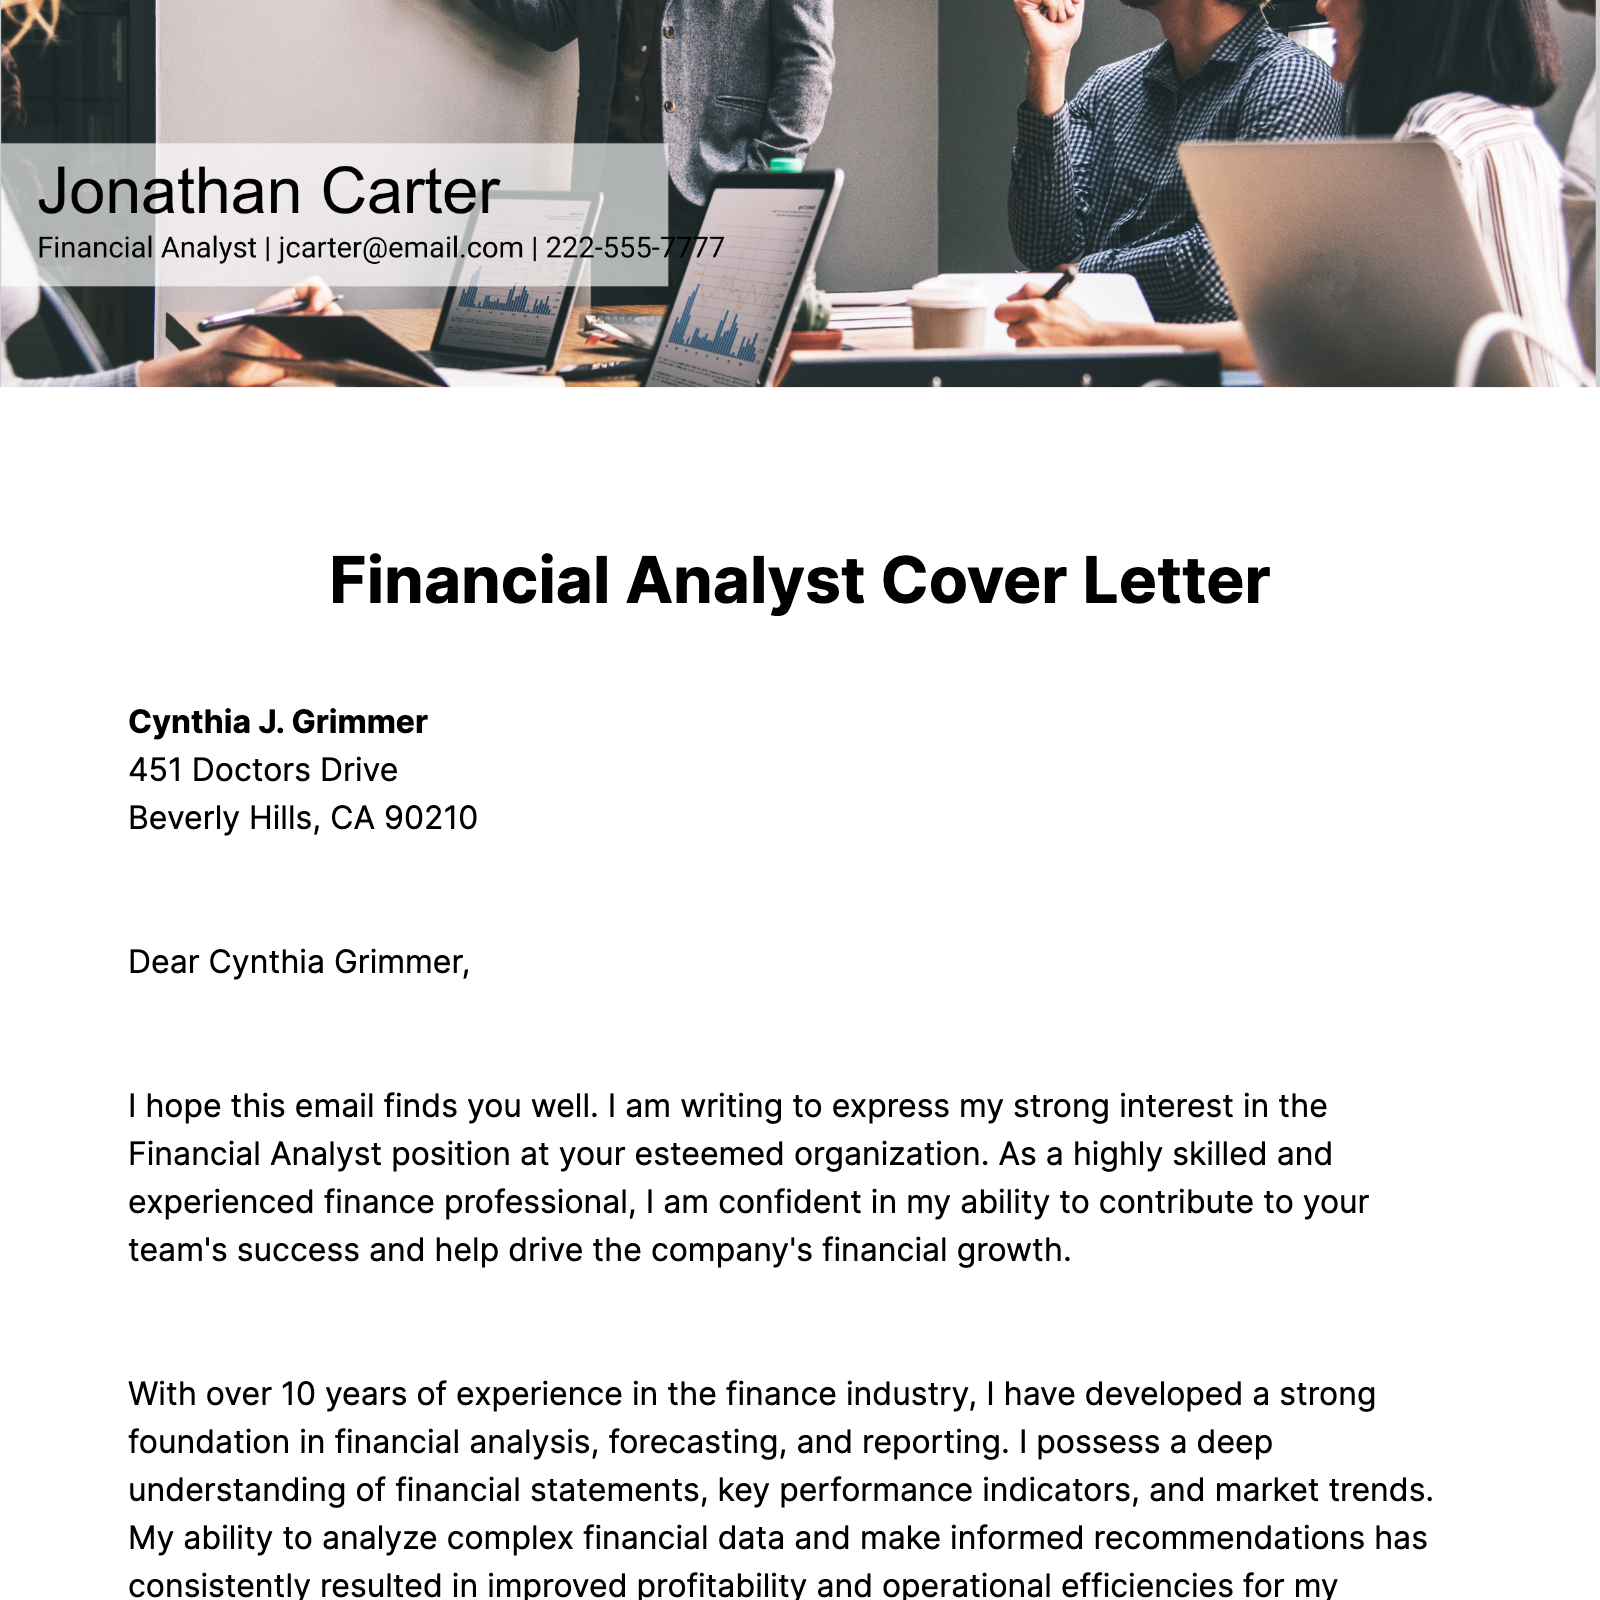 Financial Analyst Cover Letter  Template